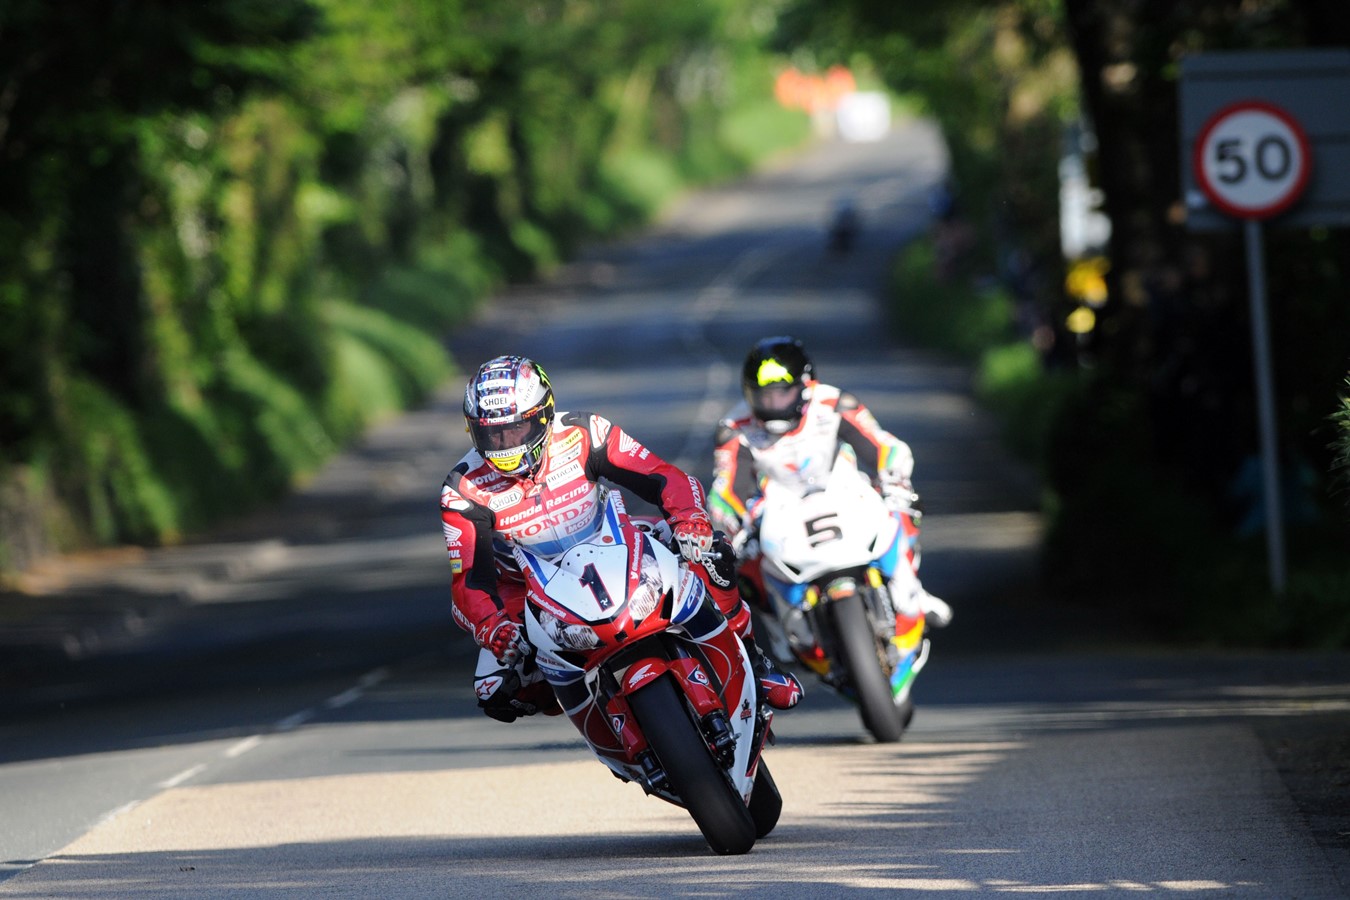 McGuinness and Cummins remain with Honda Racing for 2015 roads campaign